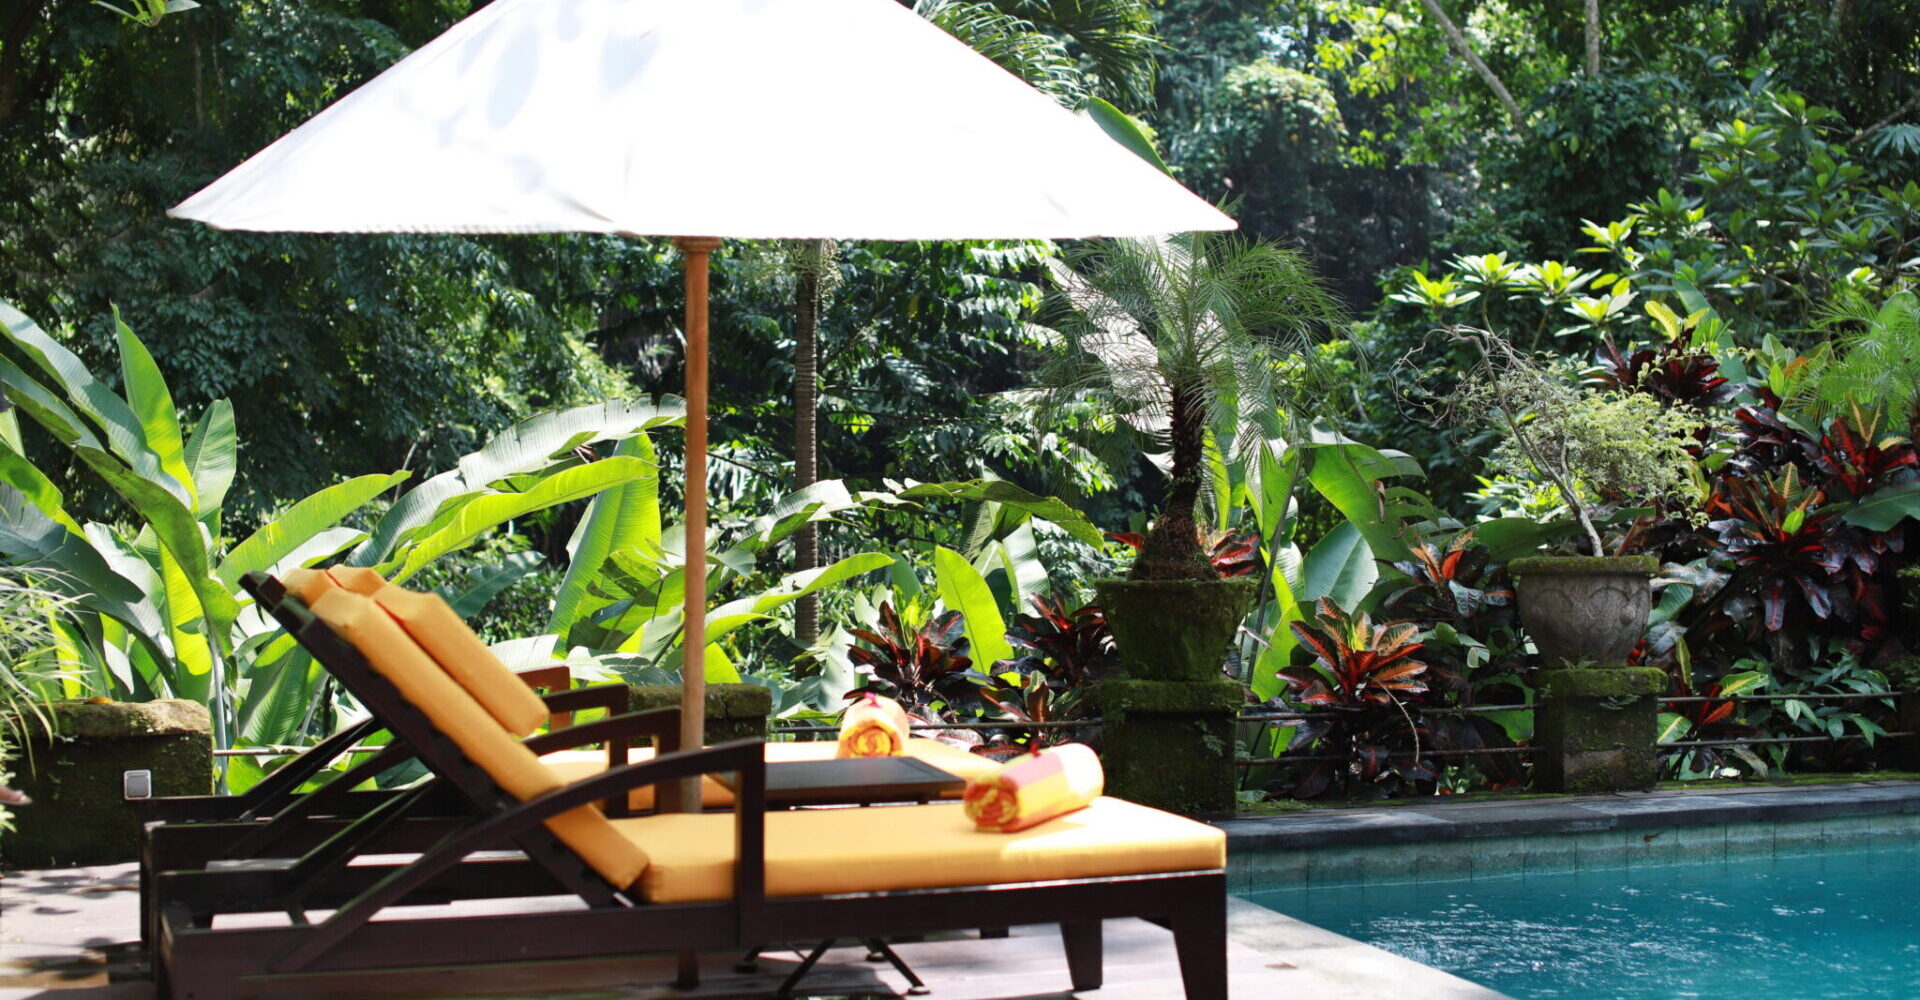 Two poolside deck chairs under an umbrella next to a private pool and overlooking the rainforest.